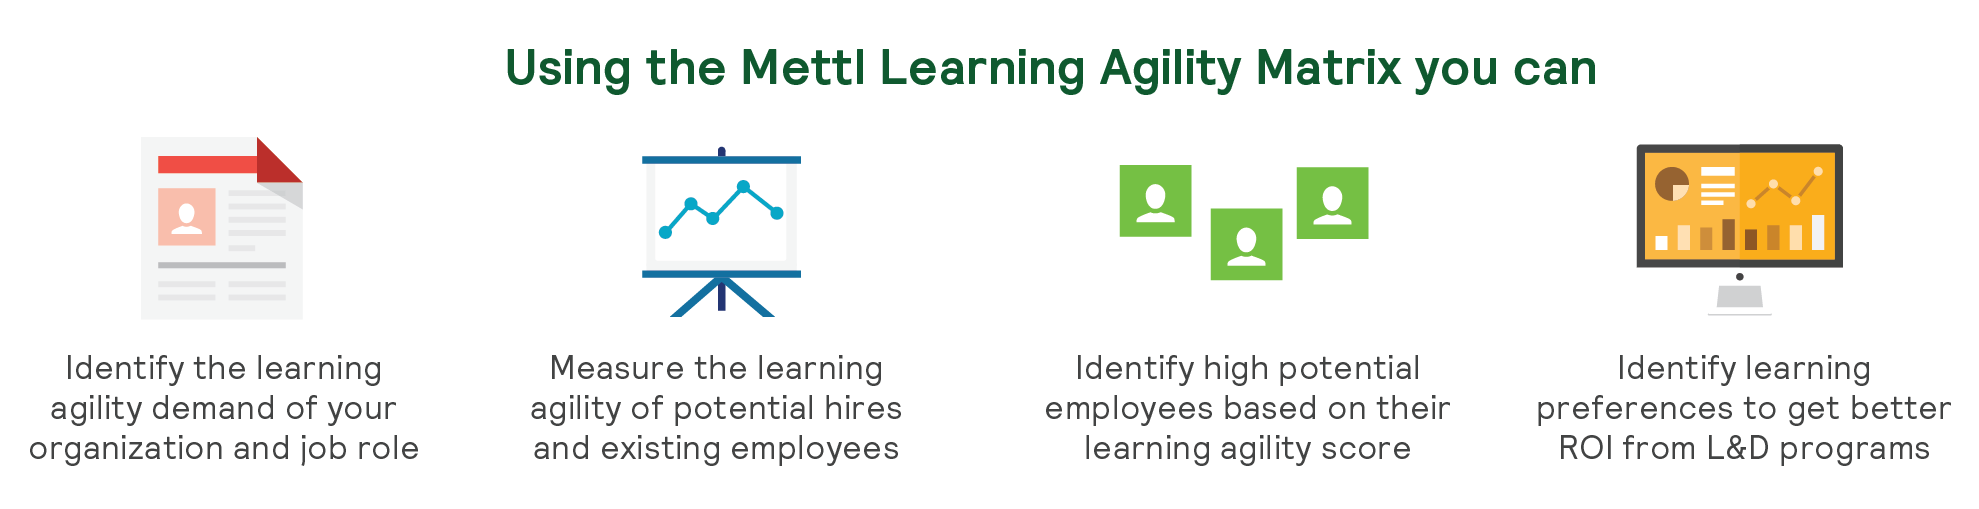 mettl_learning_agility_matrix_how_to_recruit_the_top_talent